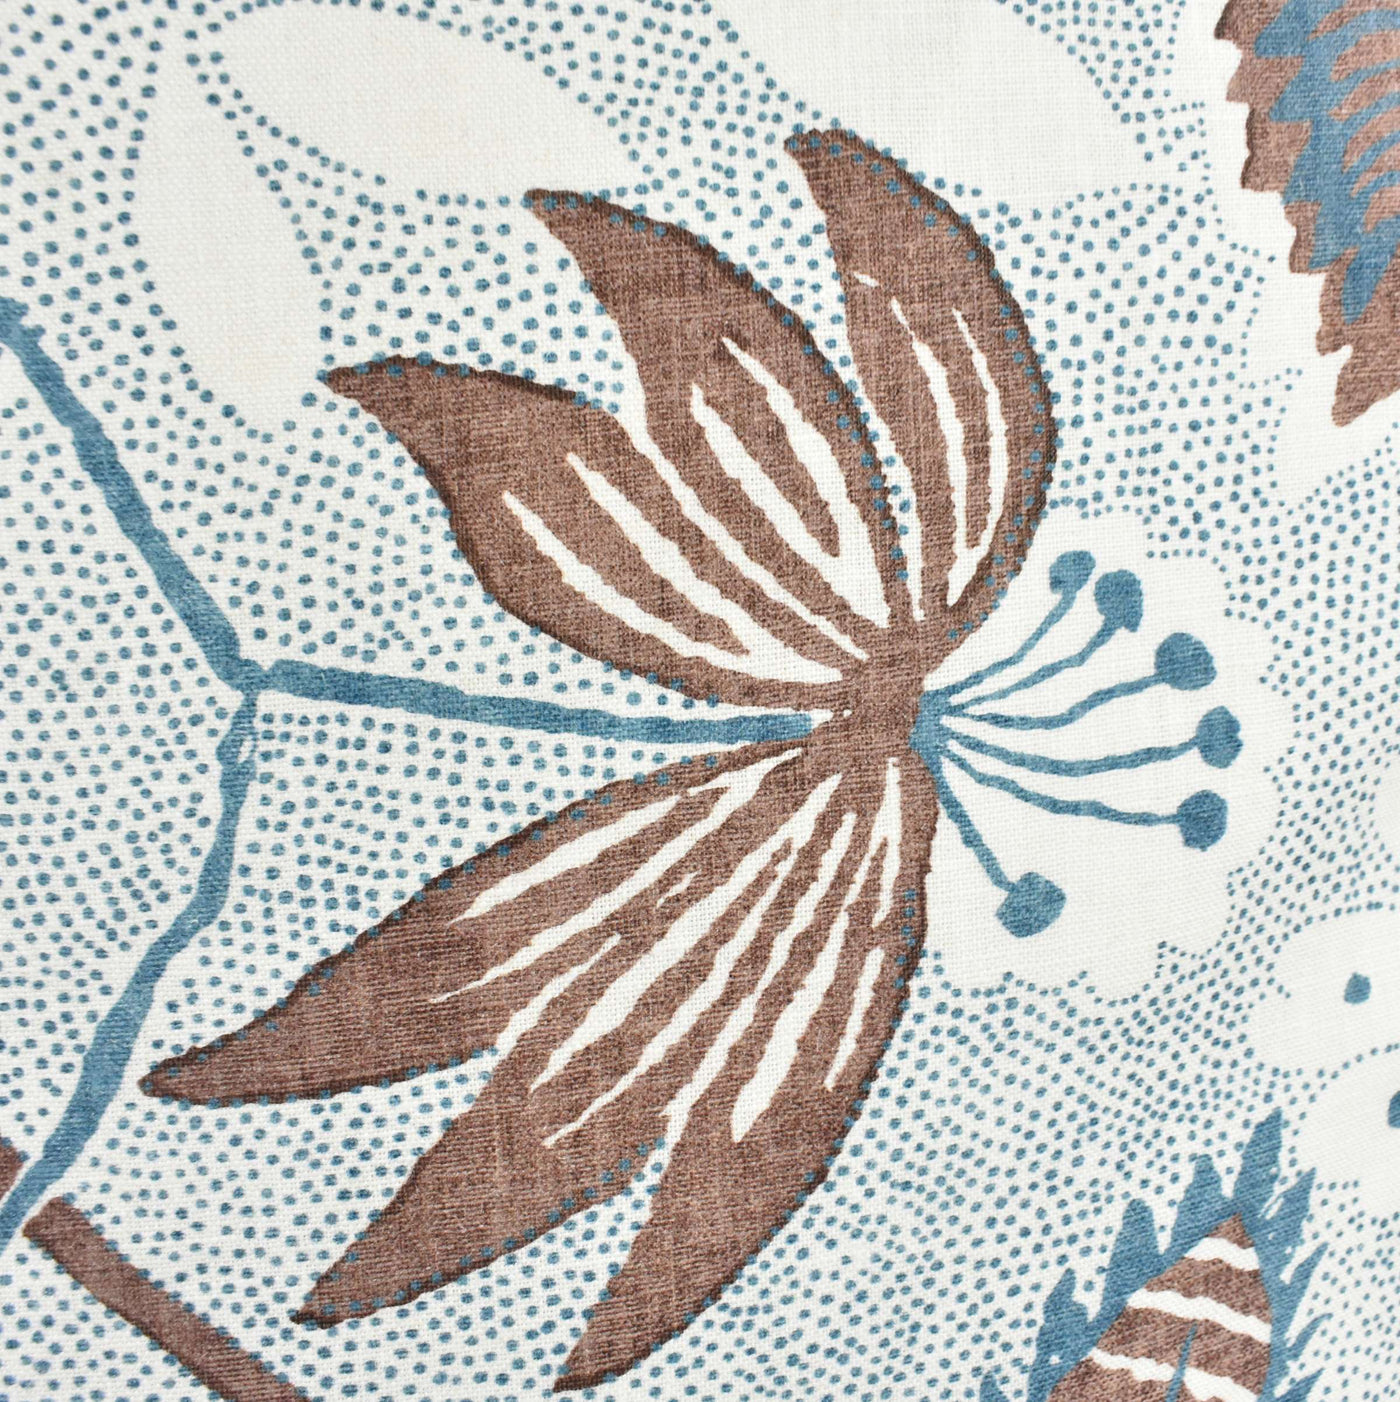 Close up image of floral pattern with petrol blue tones, chocolate brown and white